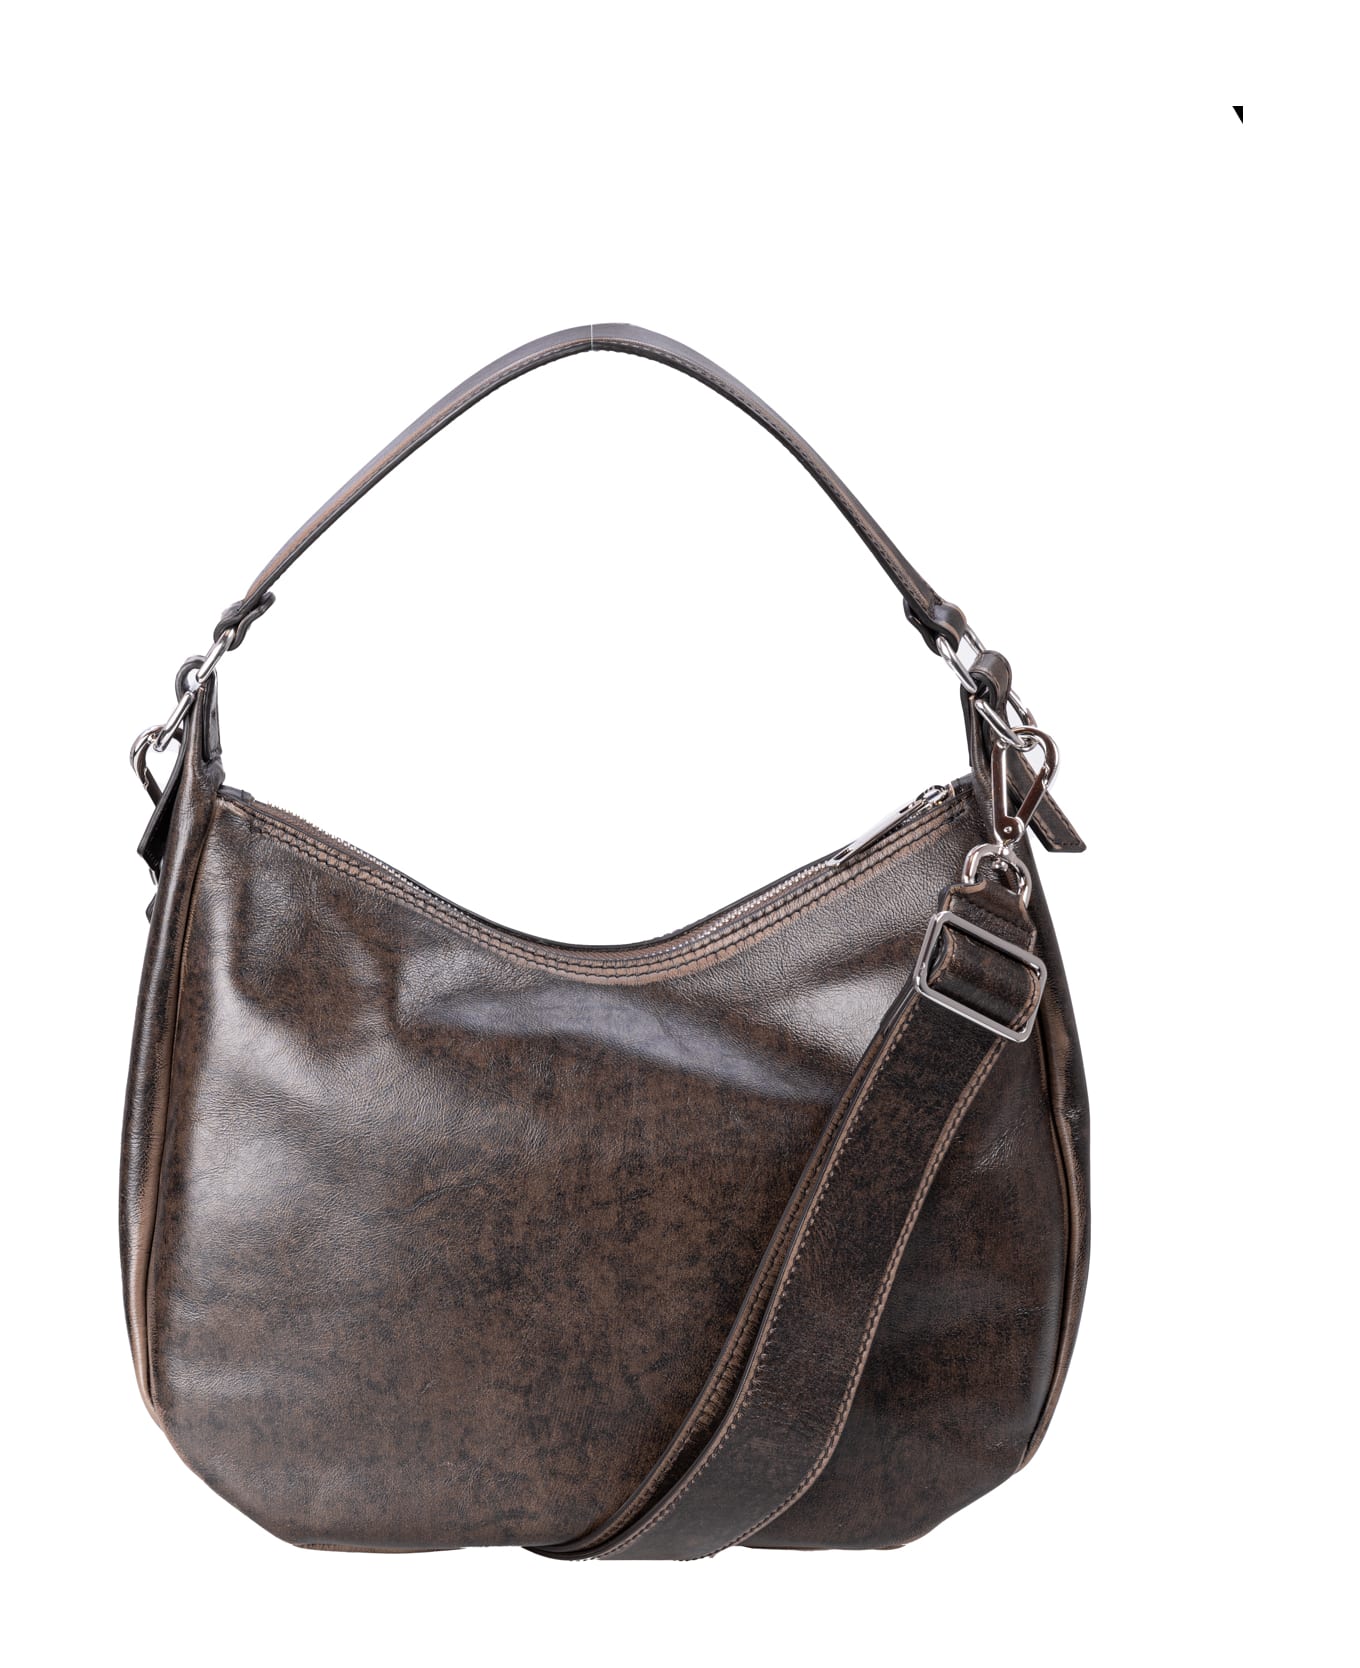 Orciani Leather Bag - Beige トートバッグ